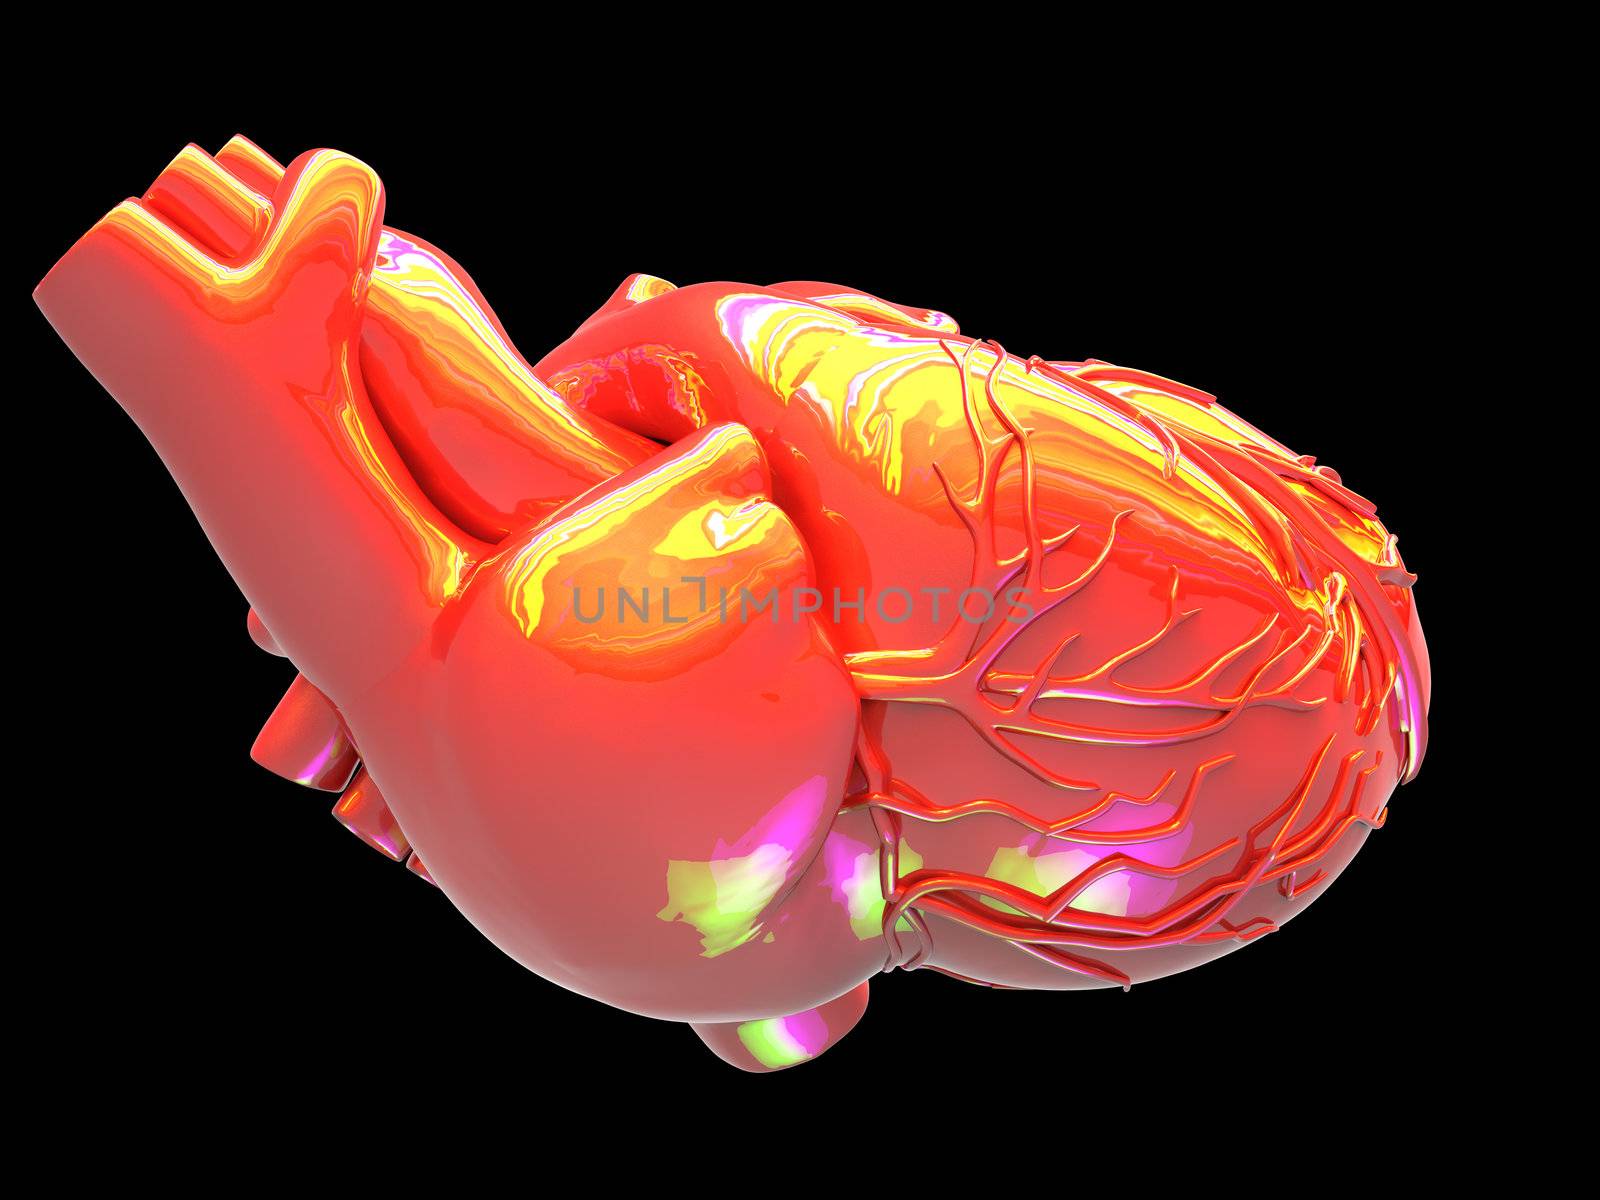 Model of artificial human heart by andromeda13